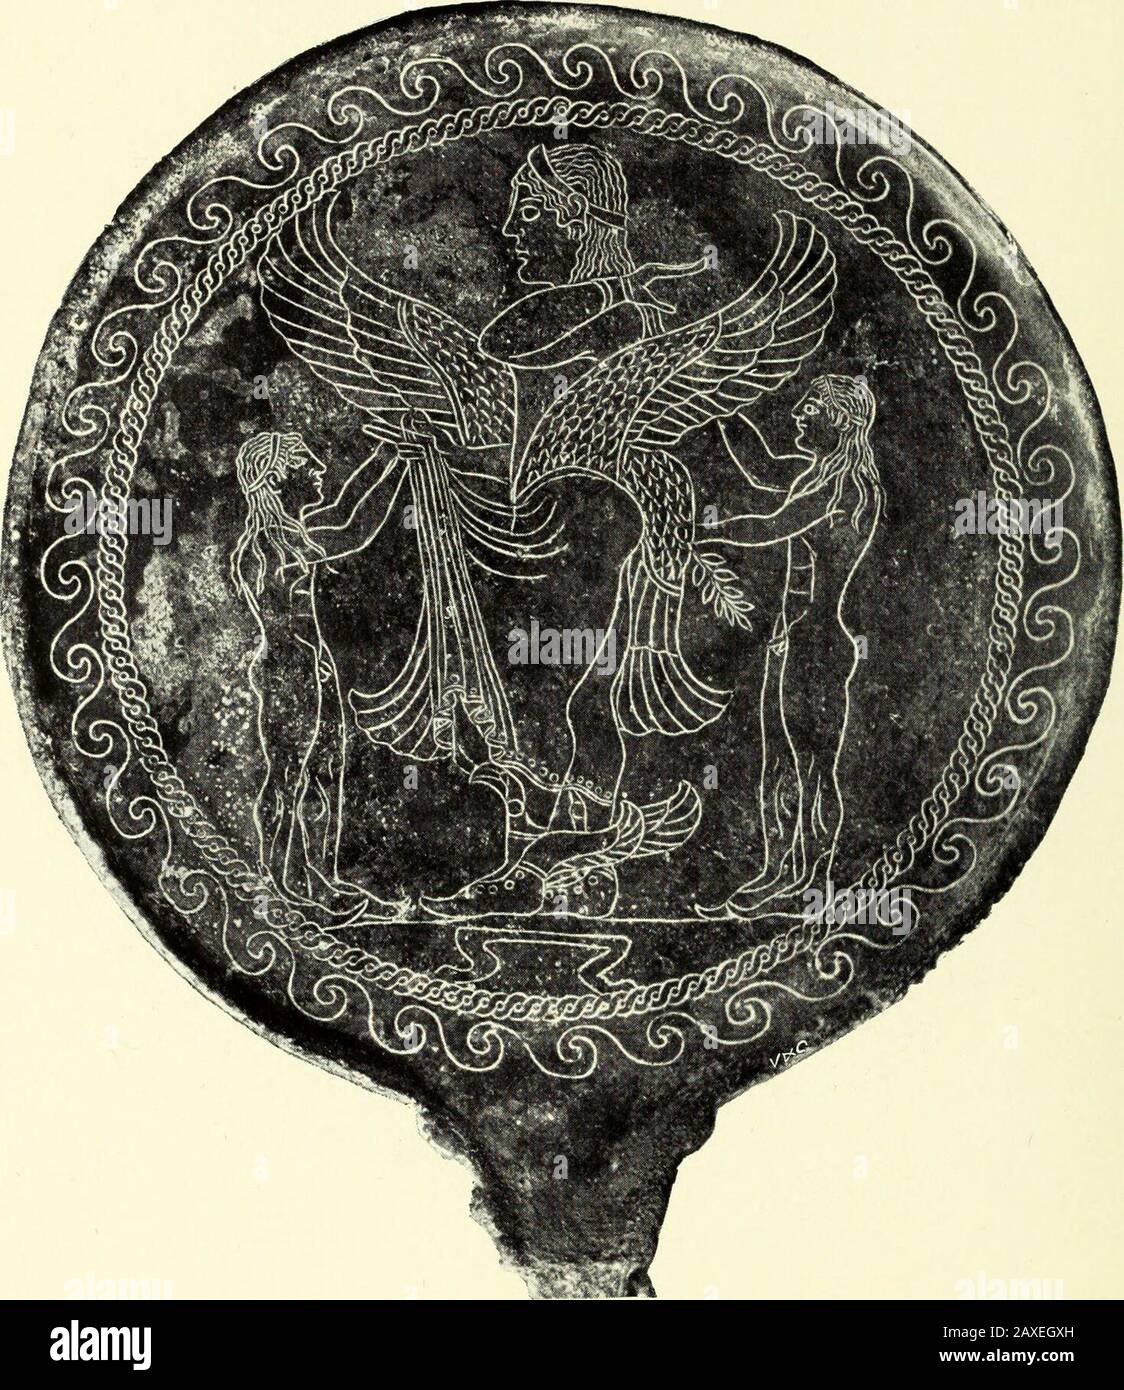 Greek bronzes . Fig. 12.—Etruscan Mirro?. British Museu?n. we see him on archaic Greek vases, and it is possible that so far the figurehas been based on Perseus. But apart from the identification of the figureon the mirror, I think we have already seen enough to recognise in it astriking combination of the influence of Greek drawing and Etruscanindividuality. On the other mirror (Fig. 13), the central figure is again one of thosemuch-winged beings of archaic art—Greek as well as Etruscan. Thepeculiarity in this instance is that the wings spring from her waist and not 34 GREEK BRONZES from the Stock Photo